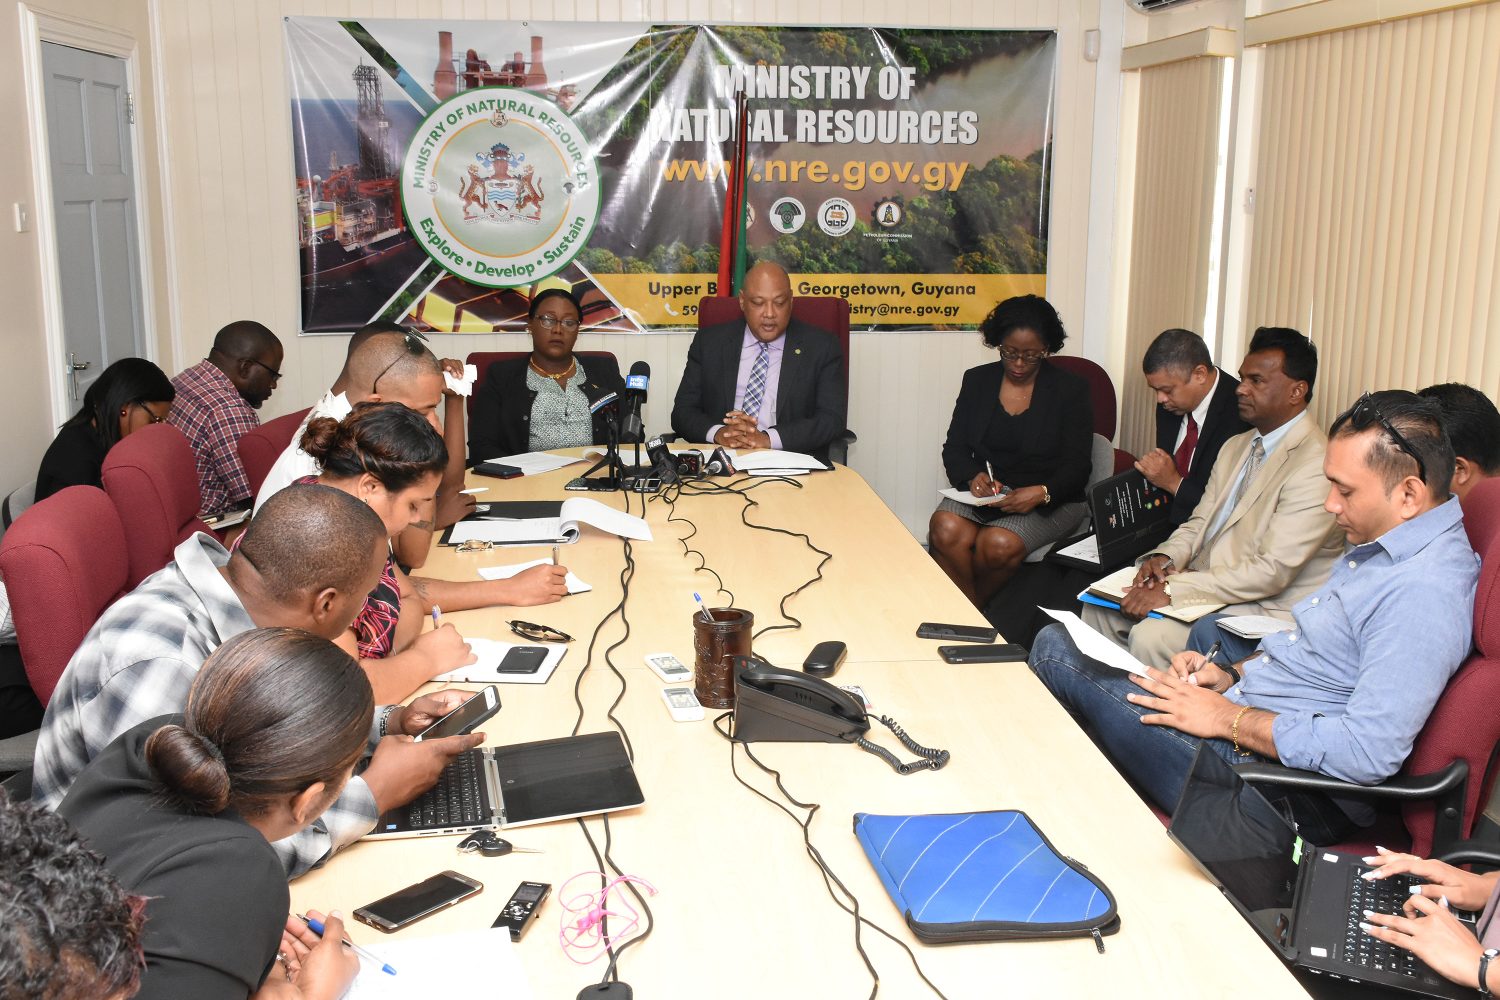 Minister of Natural Resources Raphael Trotman (right at head of table) speaking at the press conference (Department of Public Information photo)